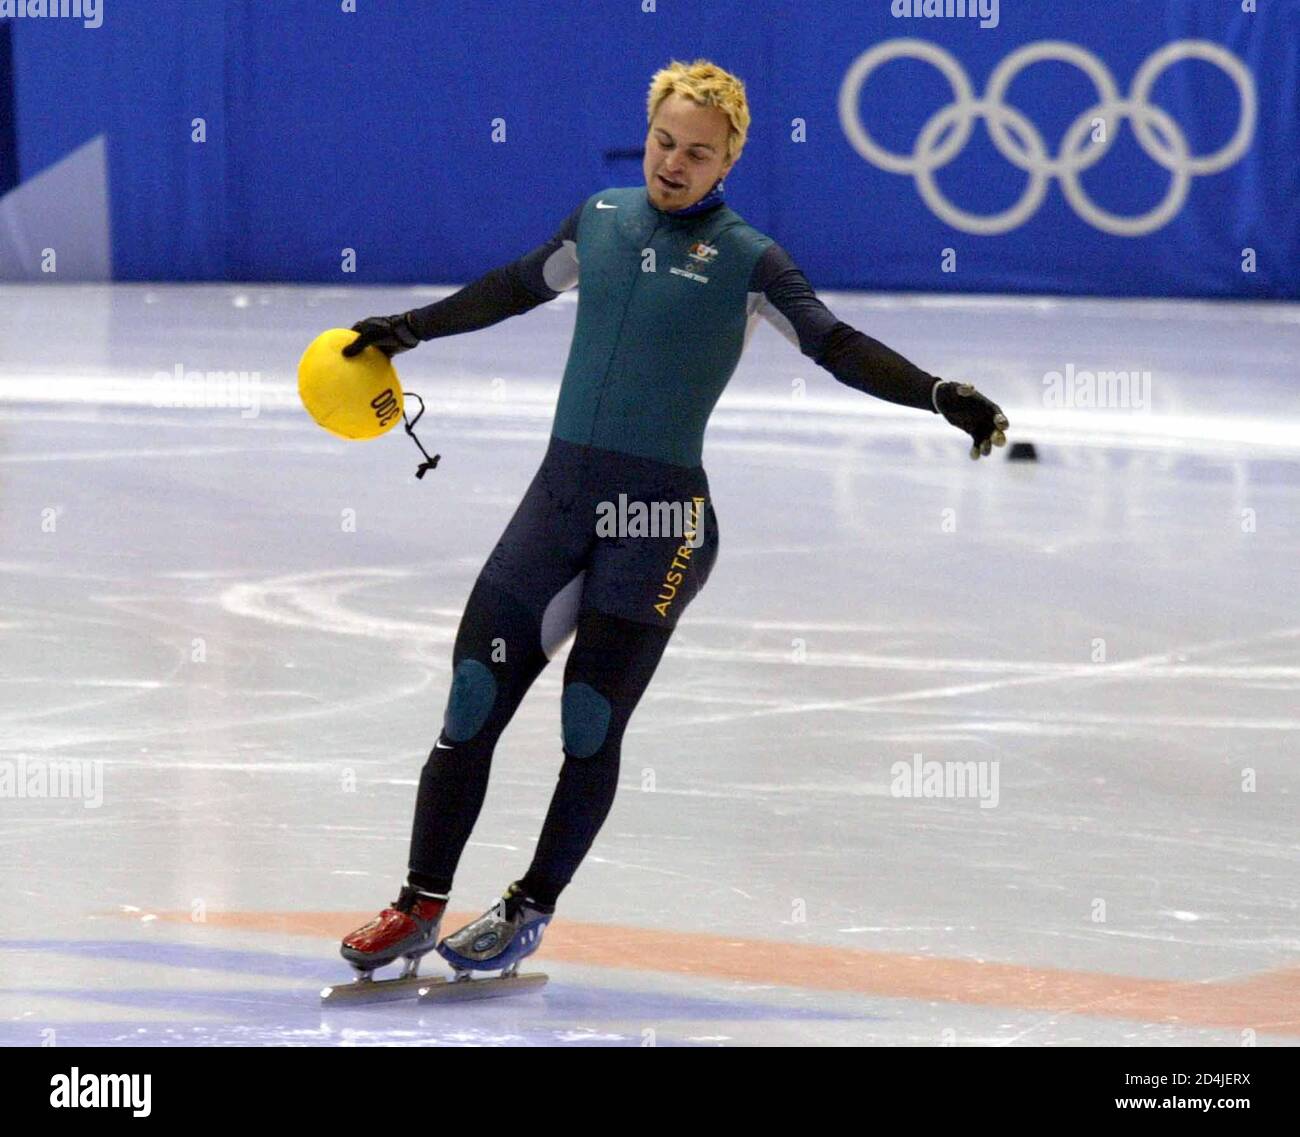 Steven of Australia celebrates his gold medal finish after the men's 1000m short track final during the Salt Lake 2002 Olympic Winter Games, February 16, 2002. Bradbury won Australia's first-ever gold